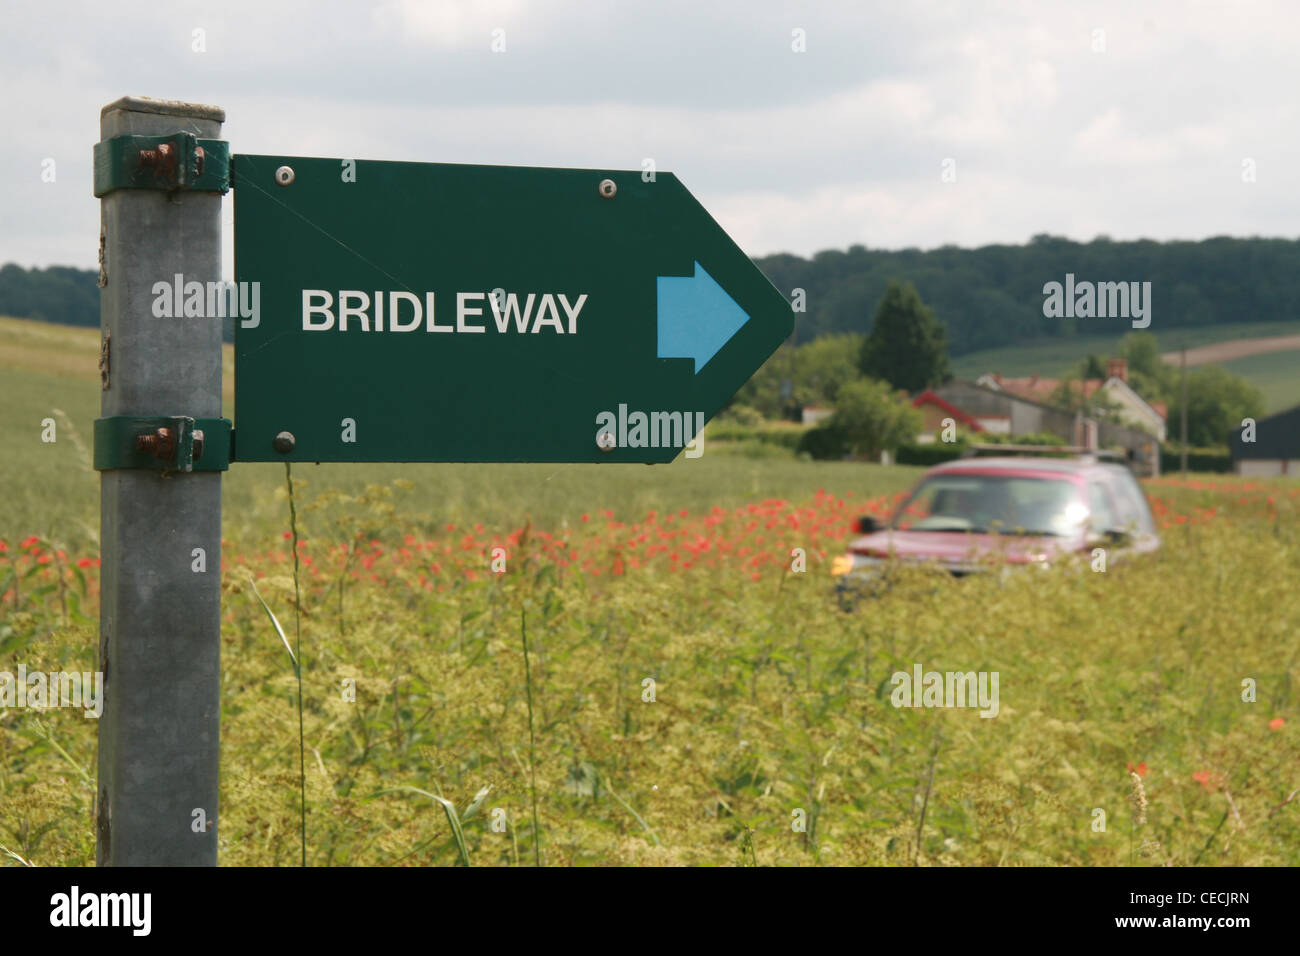 A bridleway sign next to a field of poppies with a car driving along a country lane Stock Photo